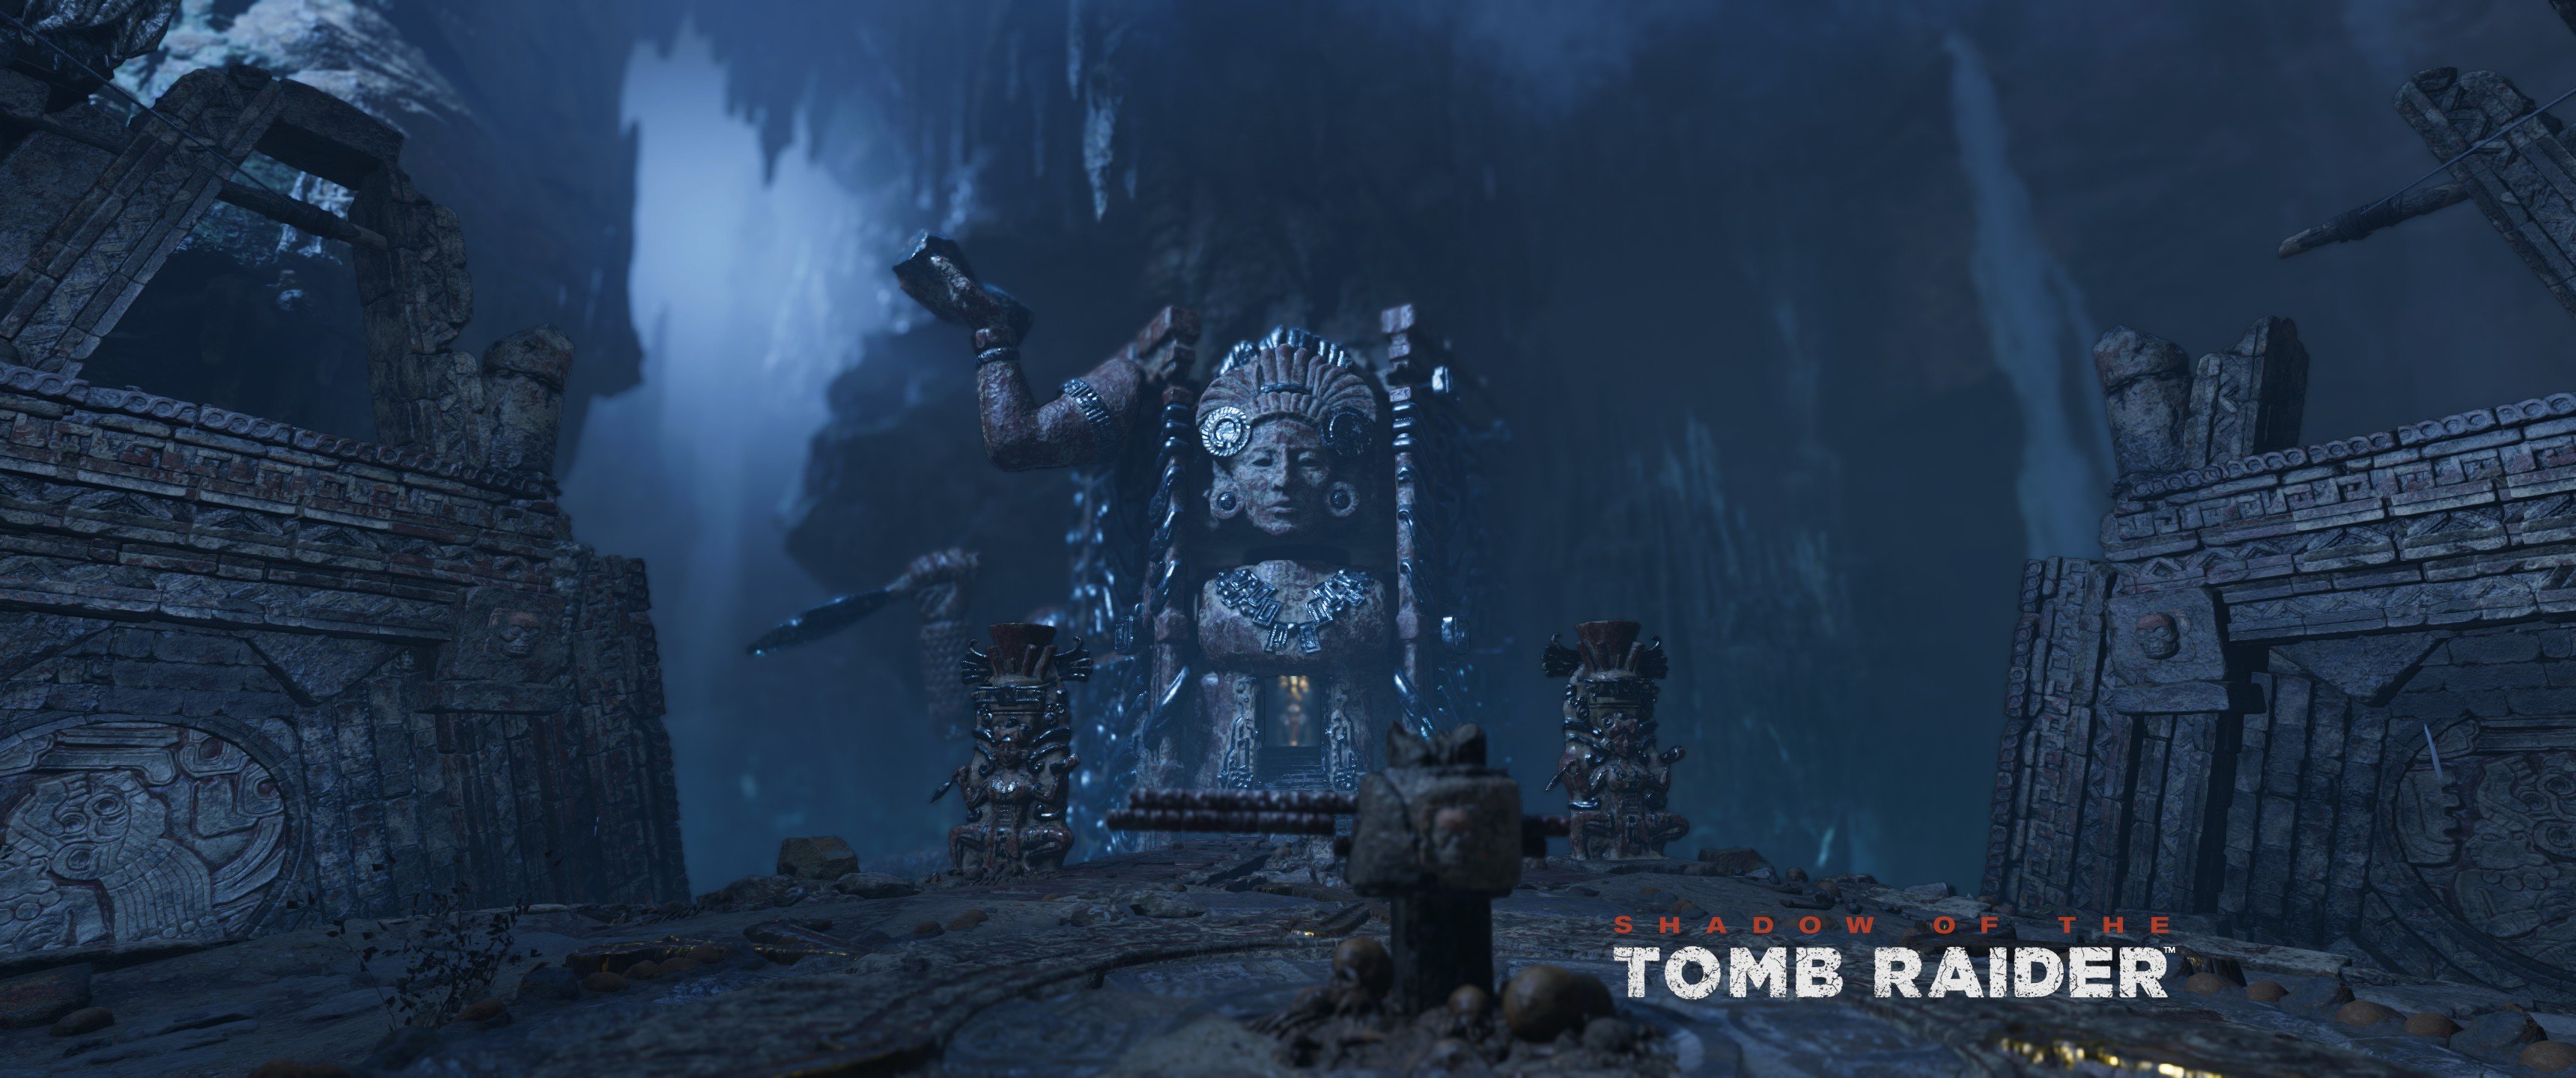 Shadow Of The Tomb Raider - Shadow Of The Tomb Raider Locations - HD Wallpaper 